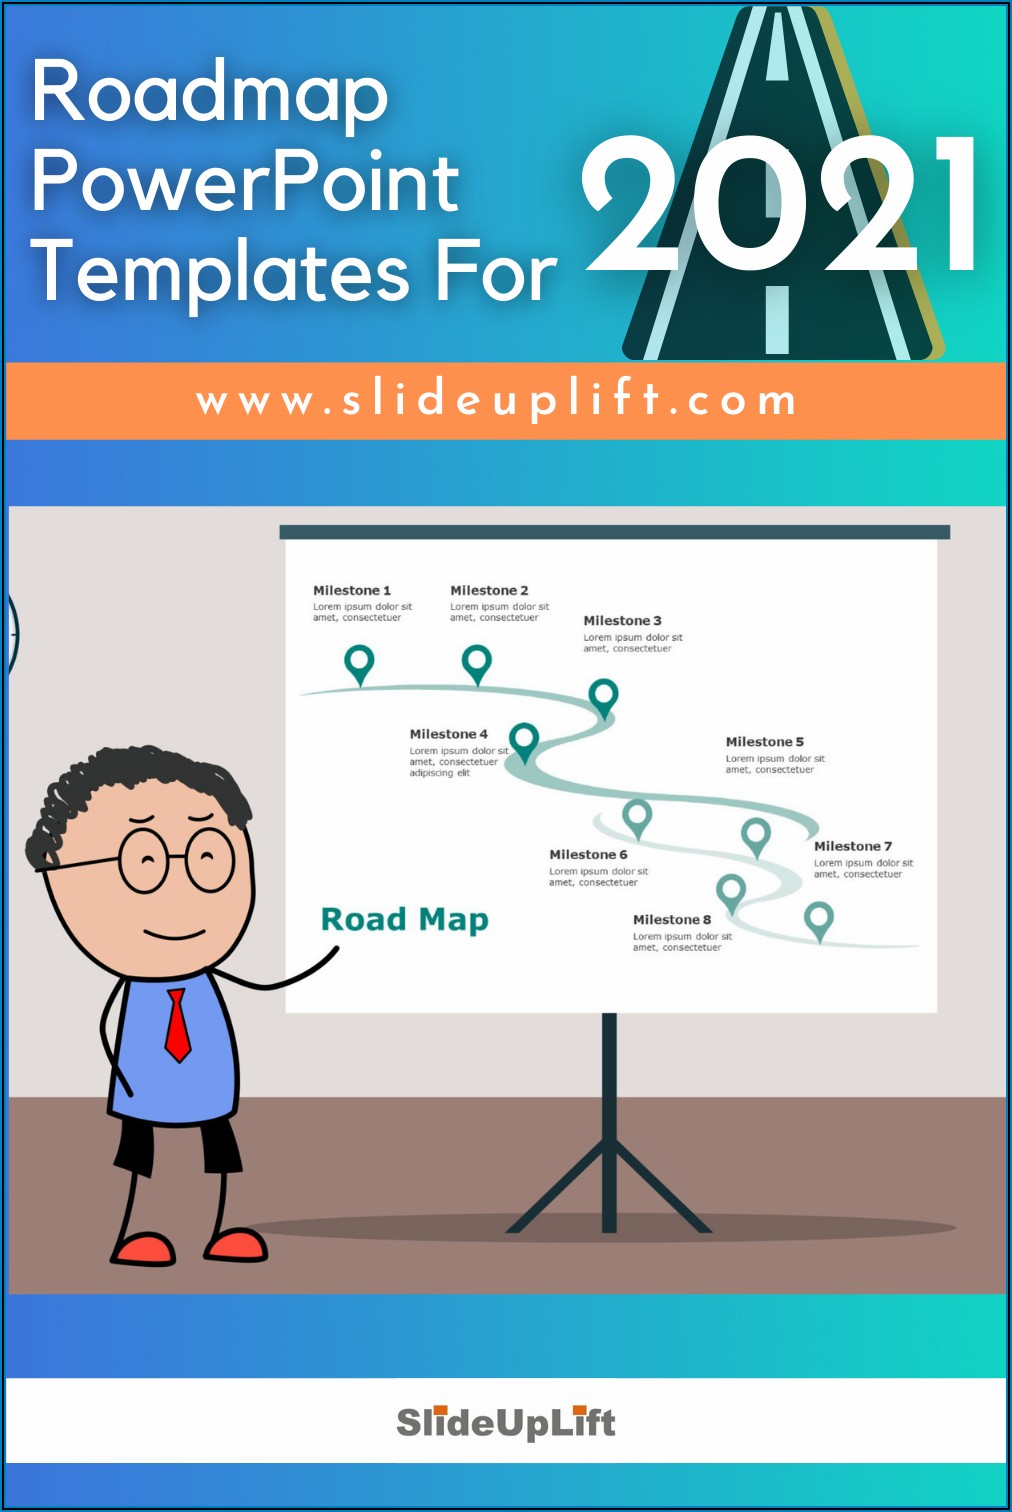 Roadmap Templates For Powerpoint Free